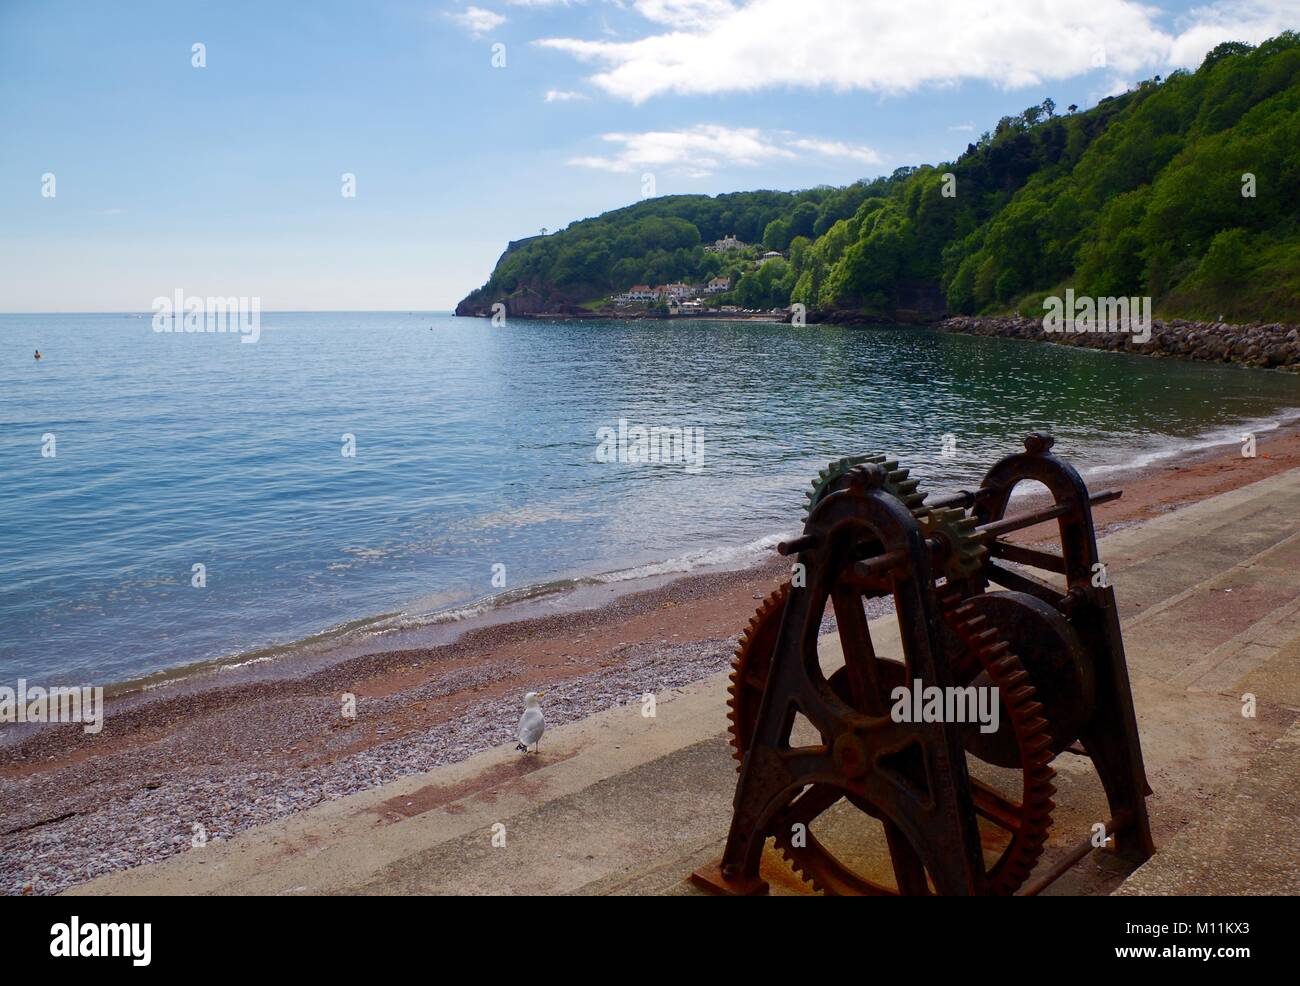 Rusty Old Boat Winch and Lush Forested Cliffs, Oddicombe Beach, Babbacombe, Torquay, South Devon, UK. Stock Photo